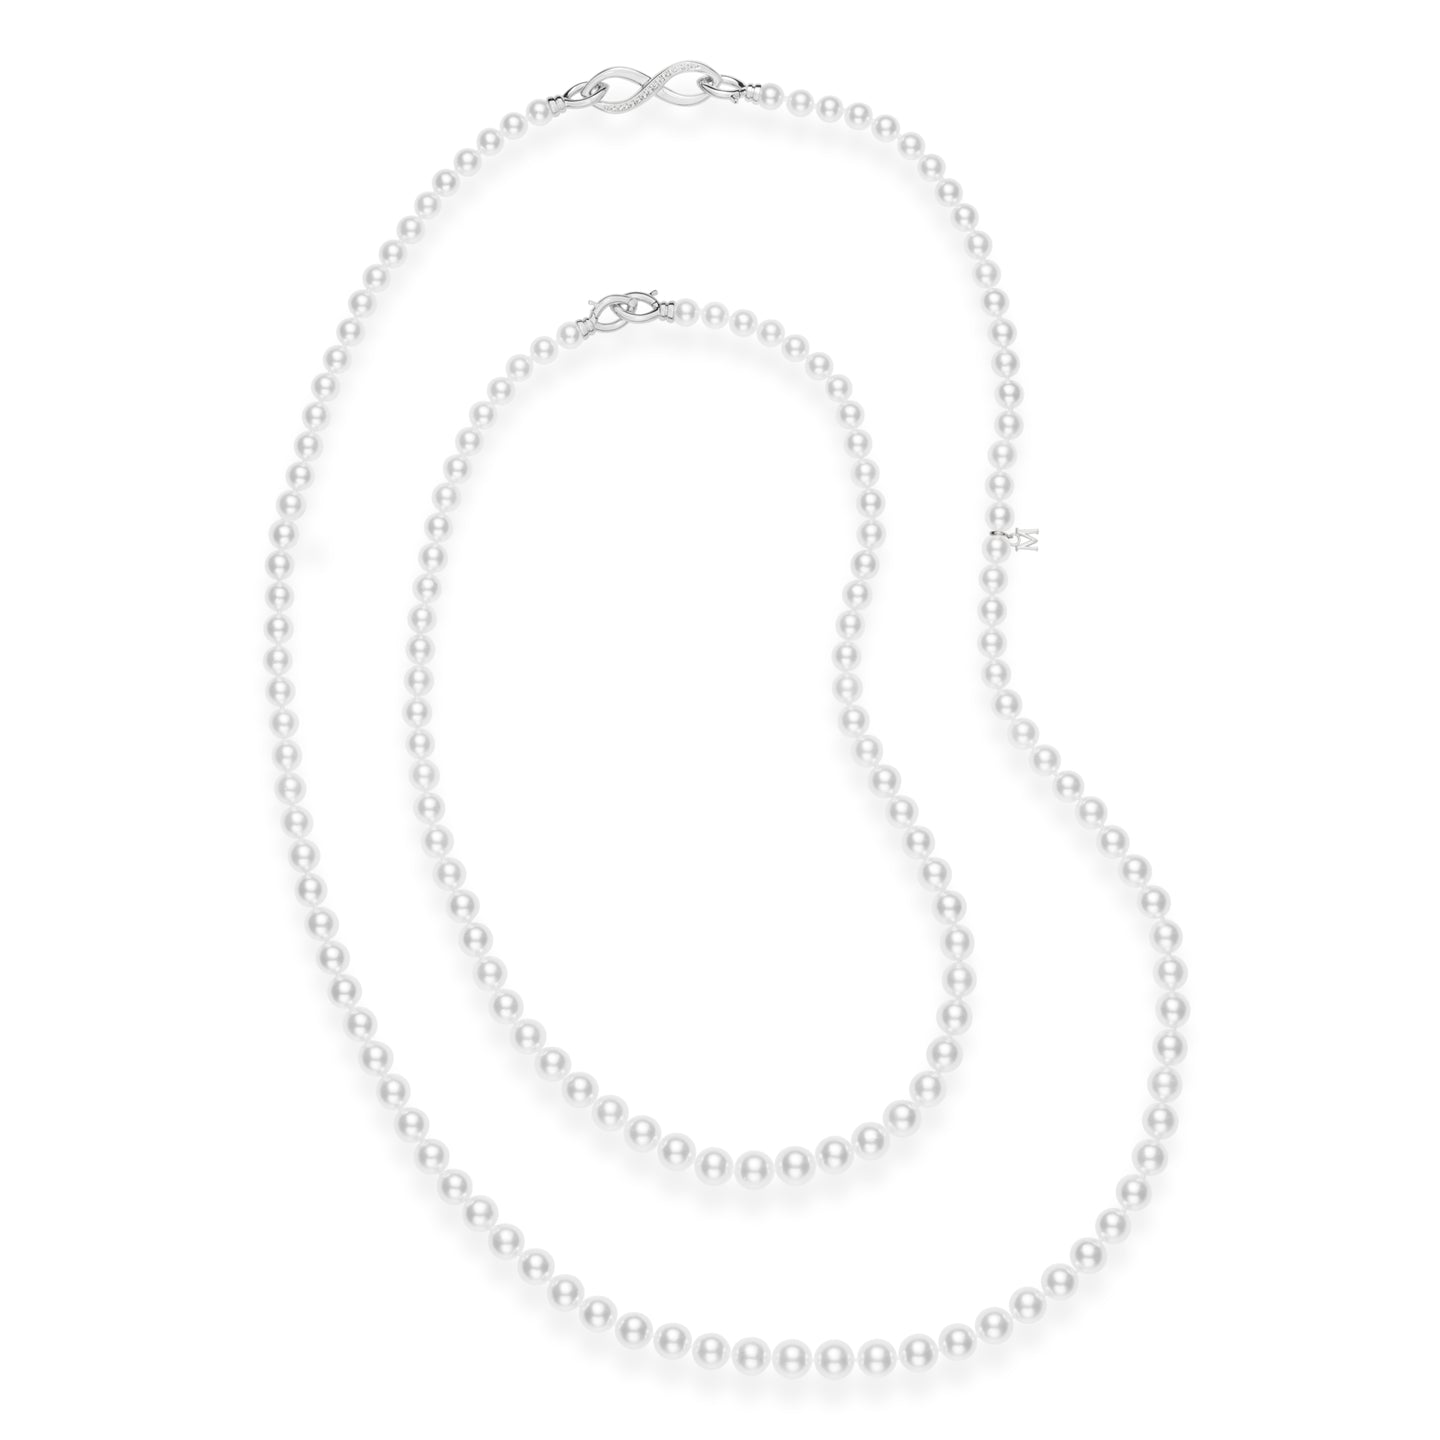 Mikimoto 7.5X5.5mm A1 Akoya Double Strand Pearl Necklace